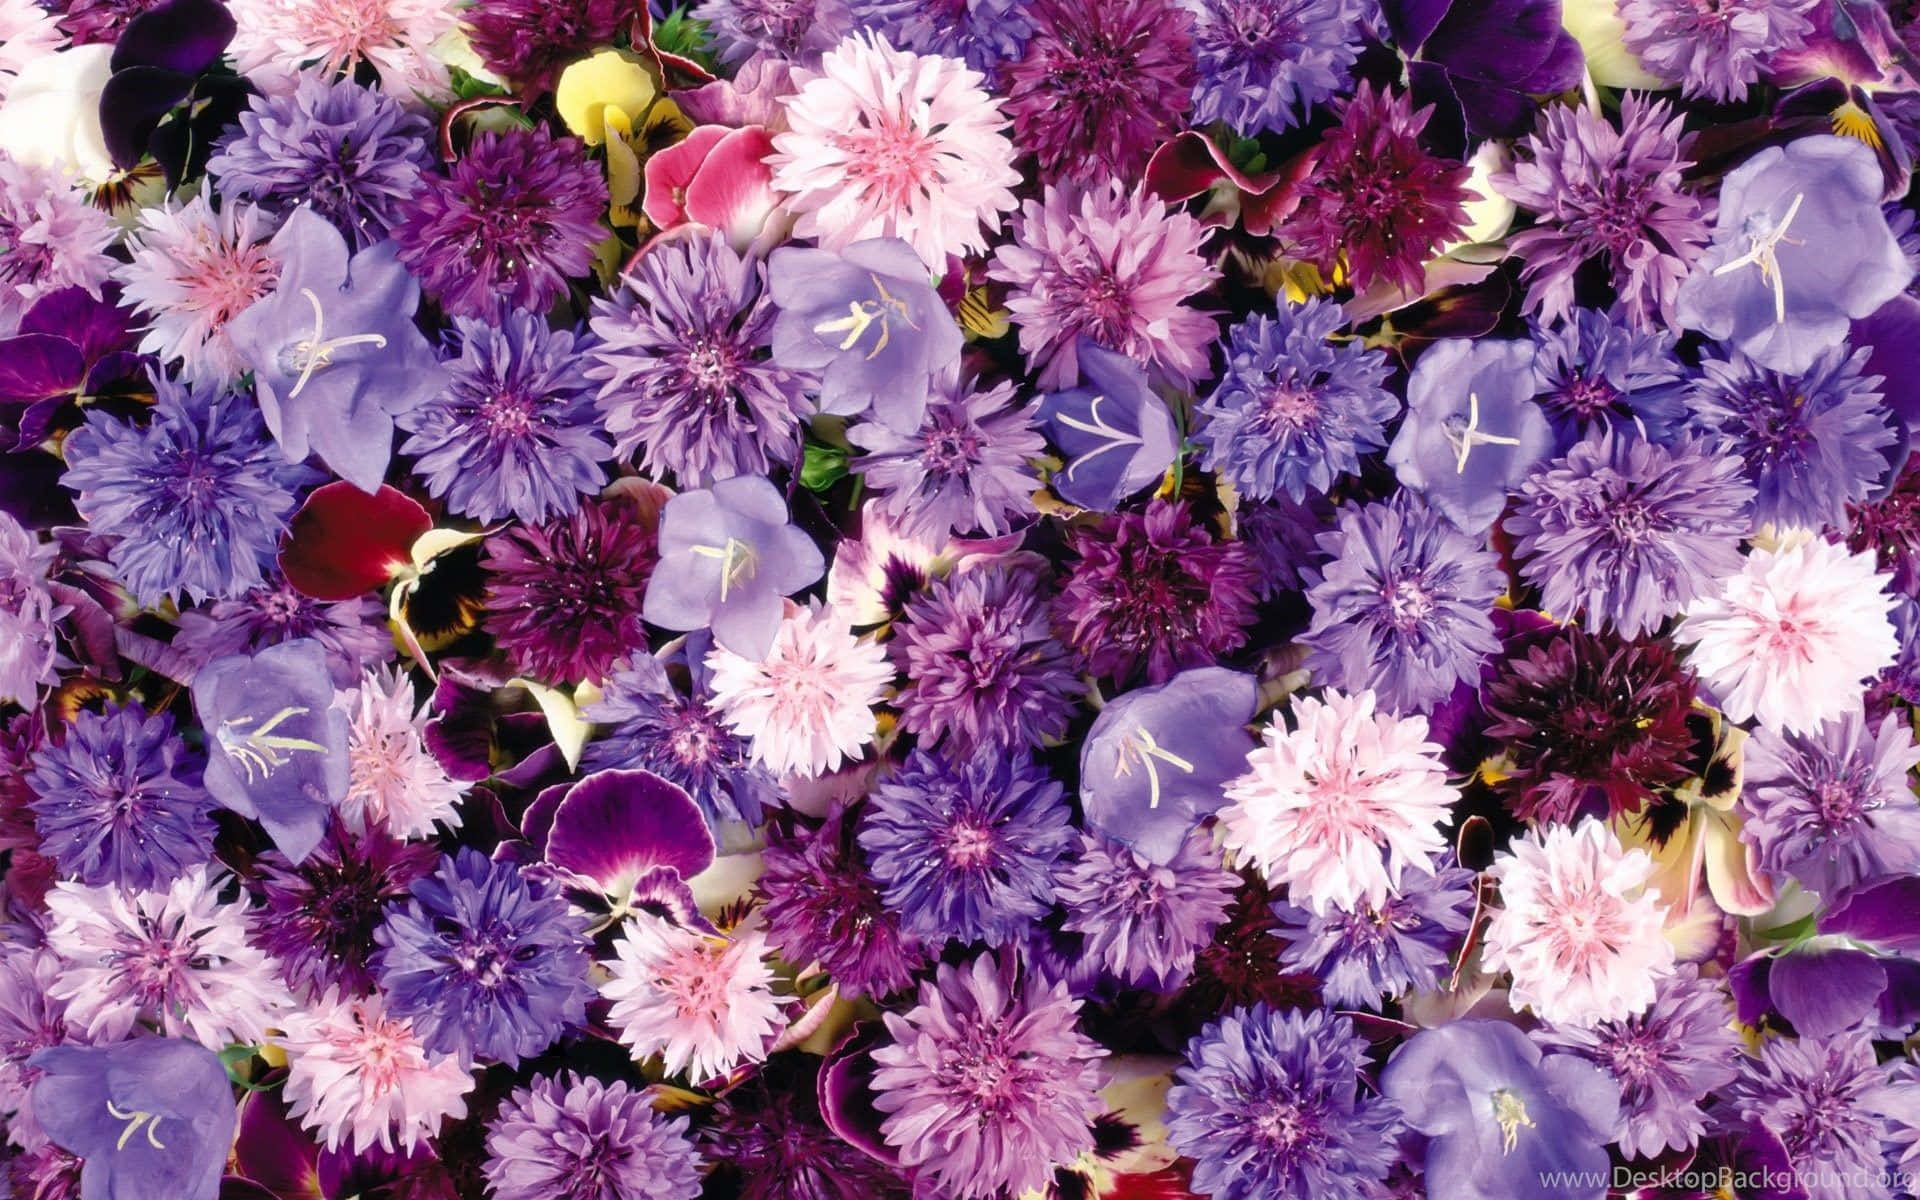 a close up of purple and pink flowers